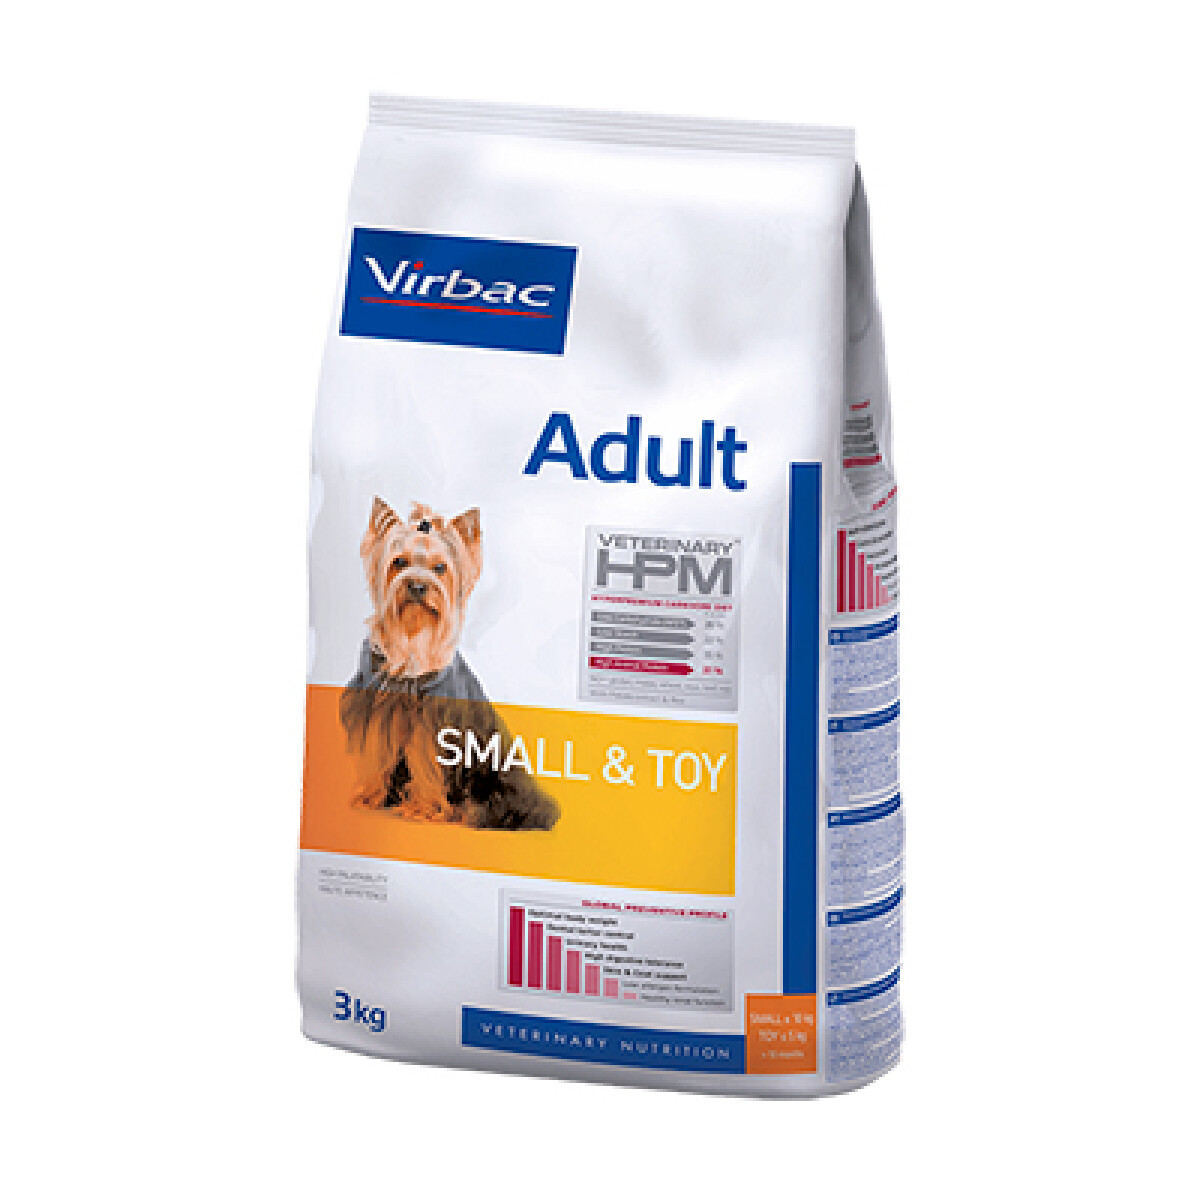 VIRBAC DOG ADULT SMALL & TOY 3KG - Unica 